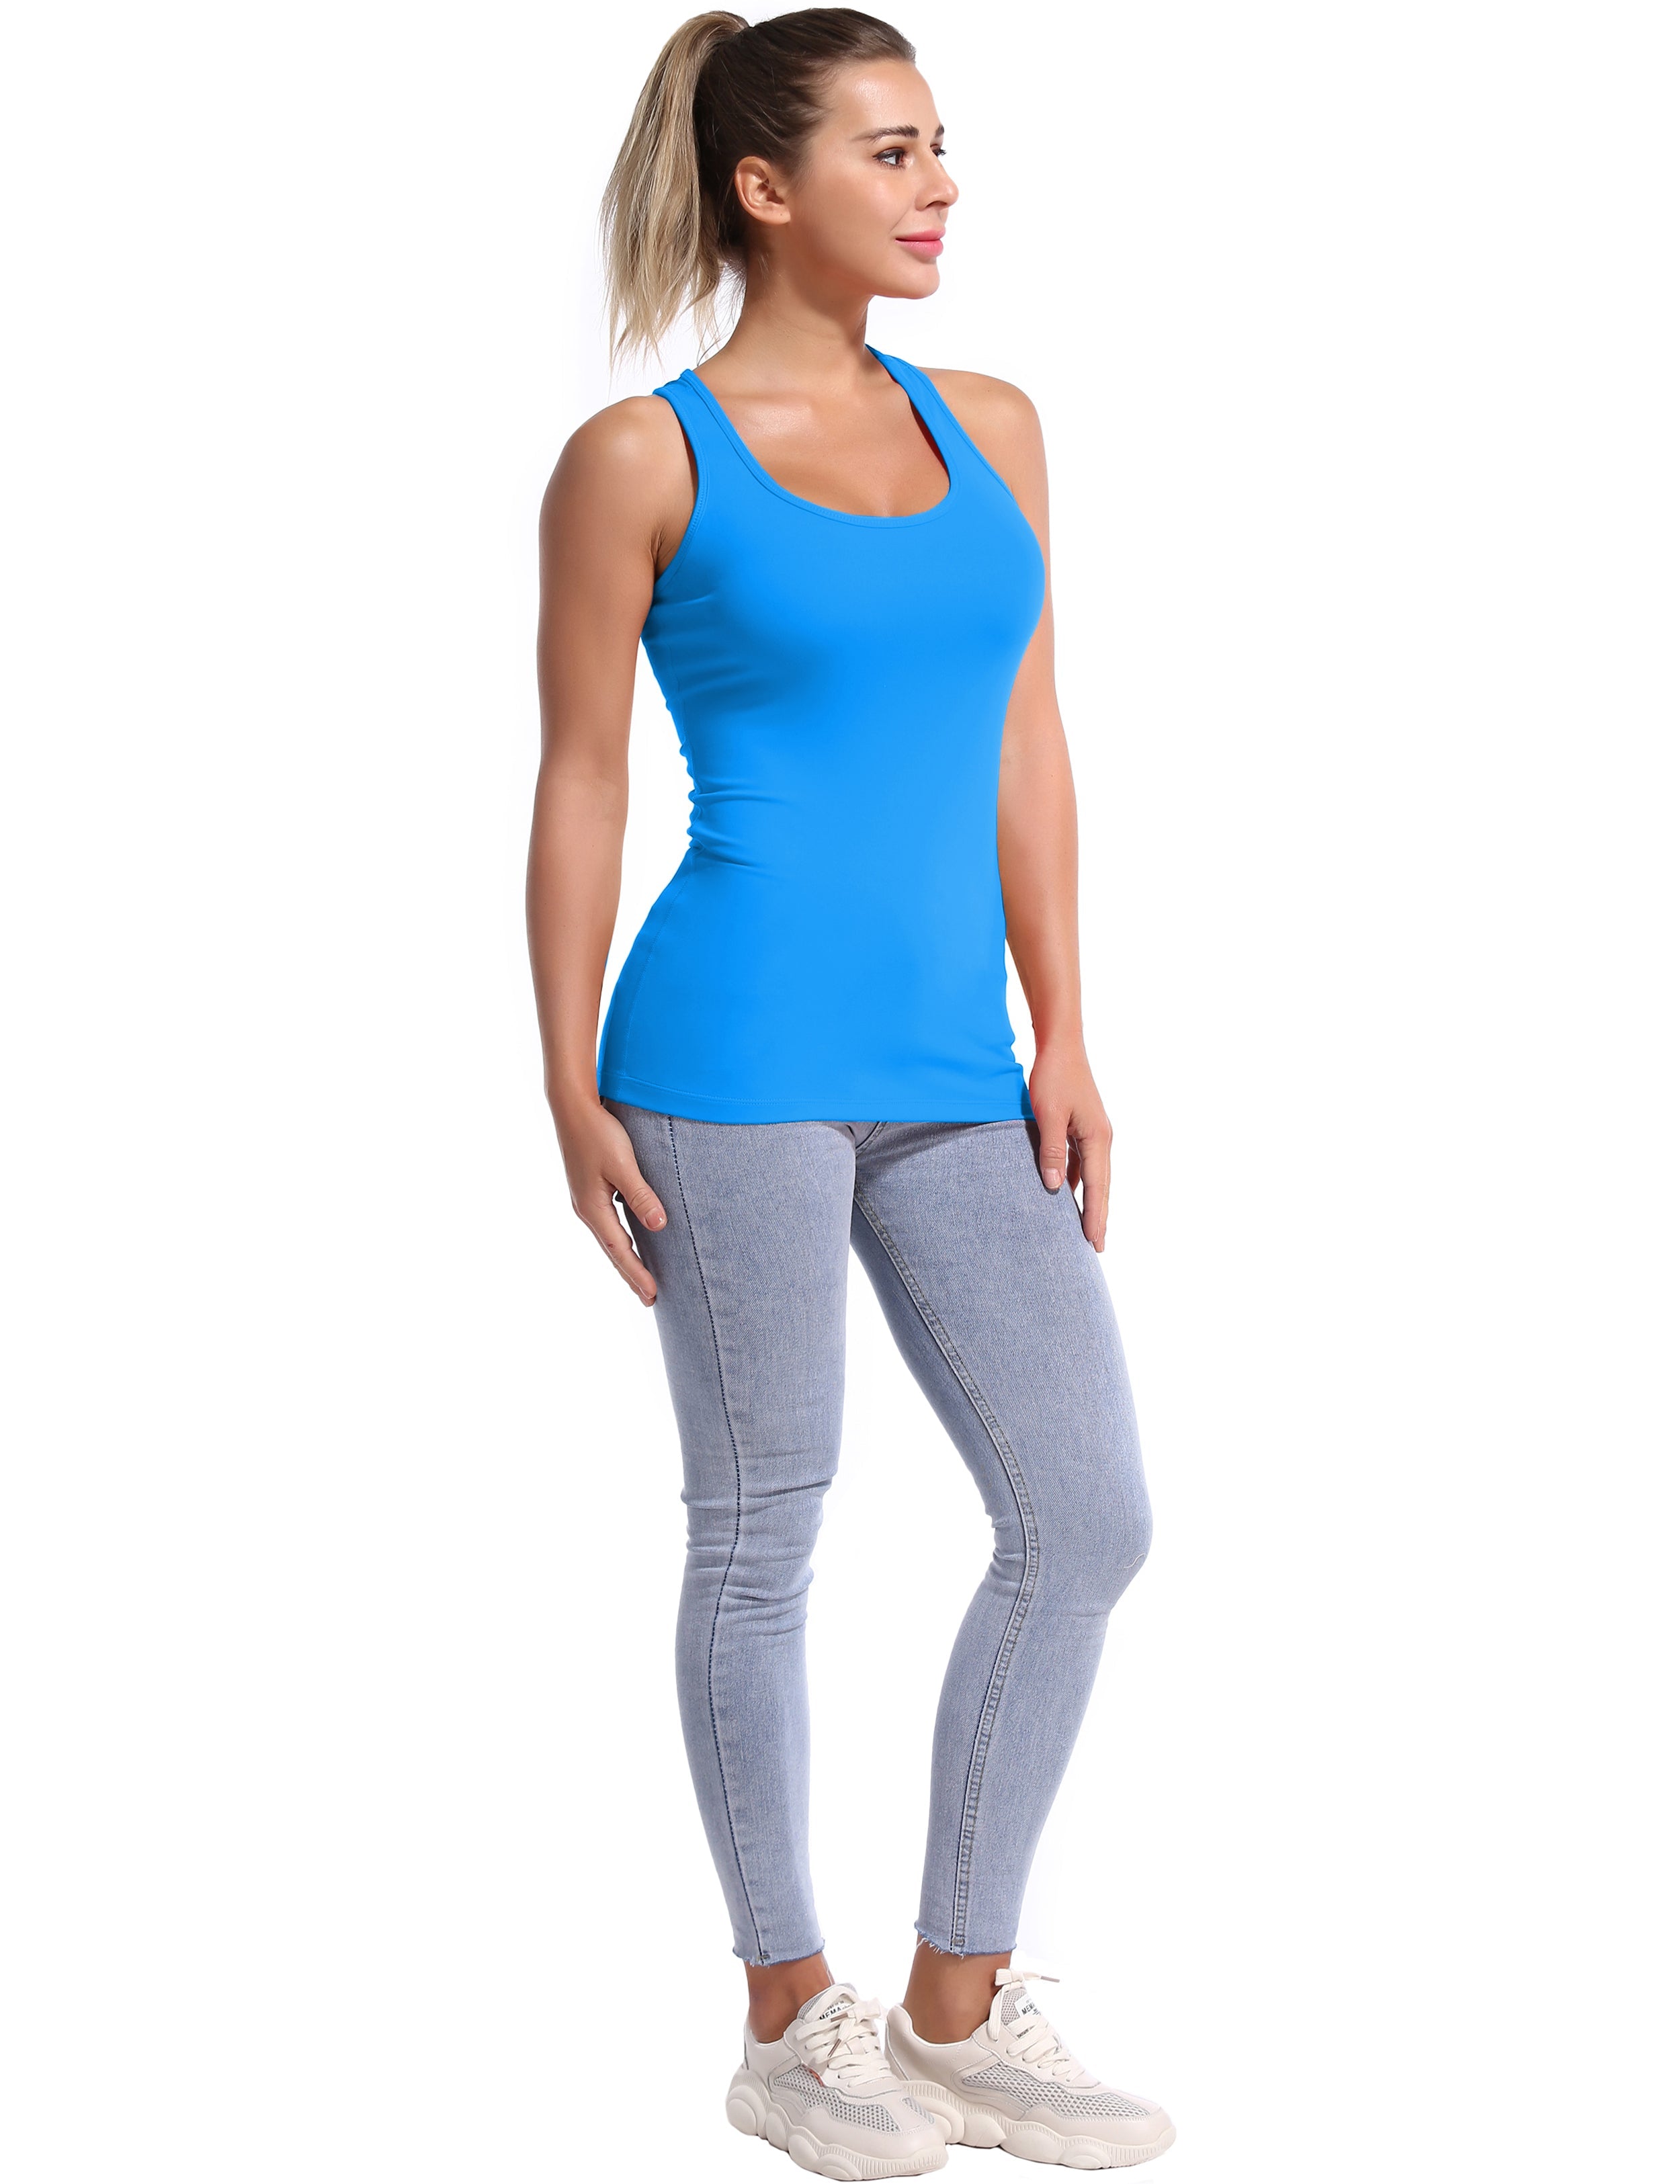 Racerback Athletic Tank Tops deepskyblue 92%Nylon/8%Spandex(Cotton Soft) Designed for Jogging Tight Fit So buttery soft, it feels weightless Sweat-wicking Four-way stretch Breathable Contours your body Sits below the waistband for moderate, everyday coverage